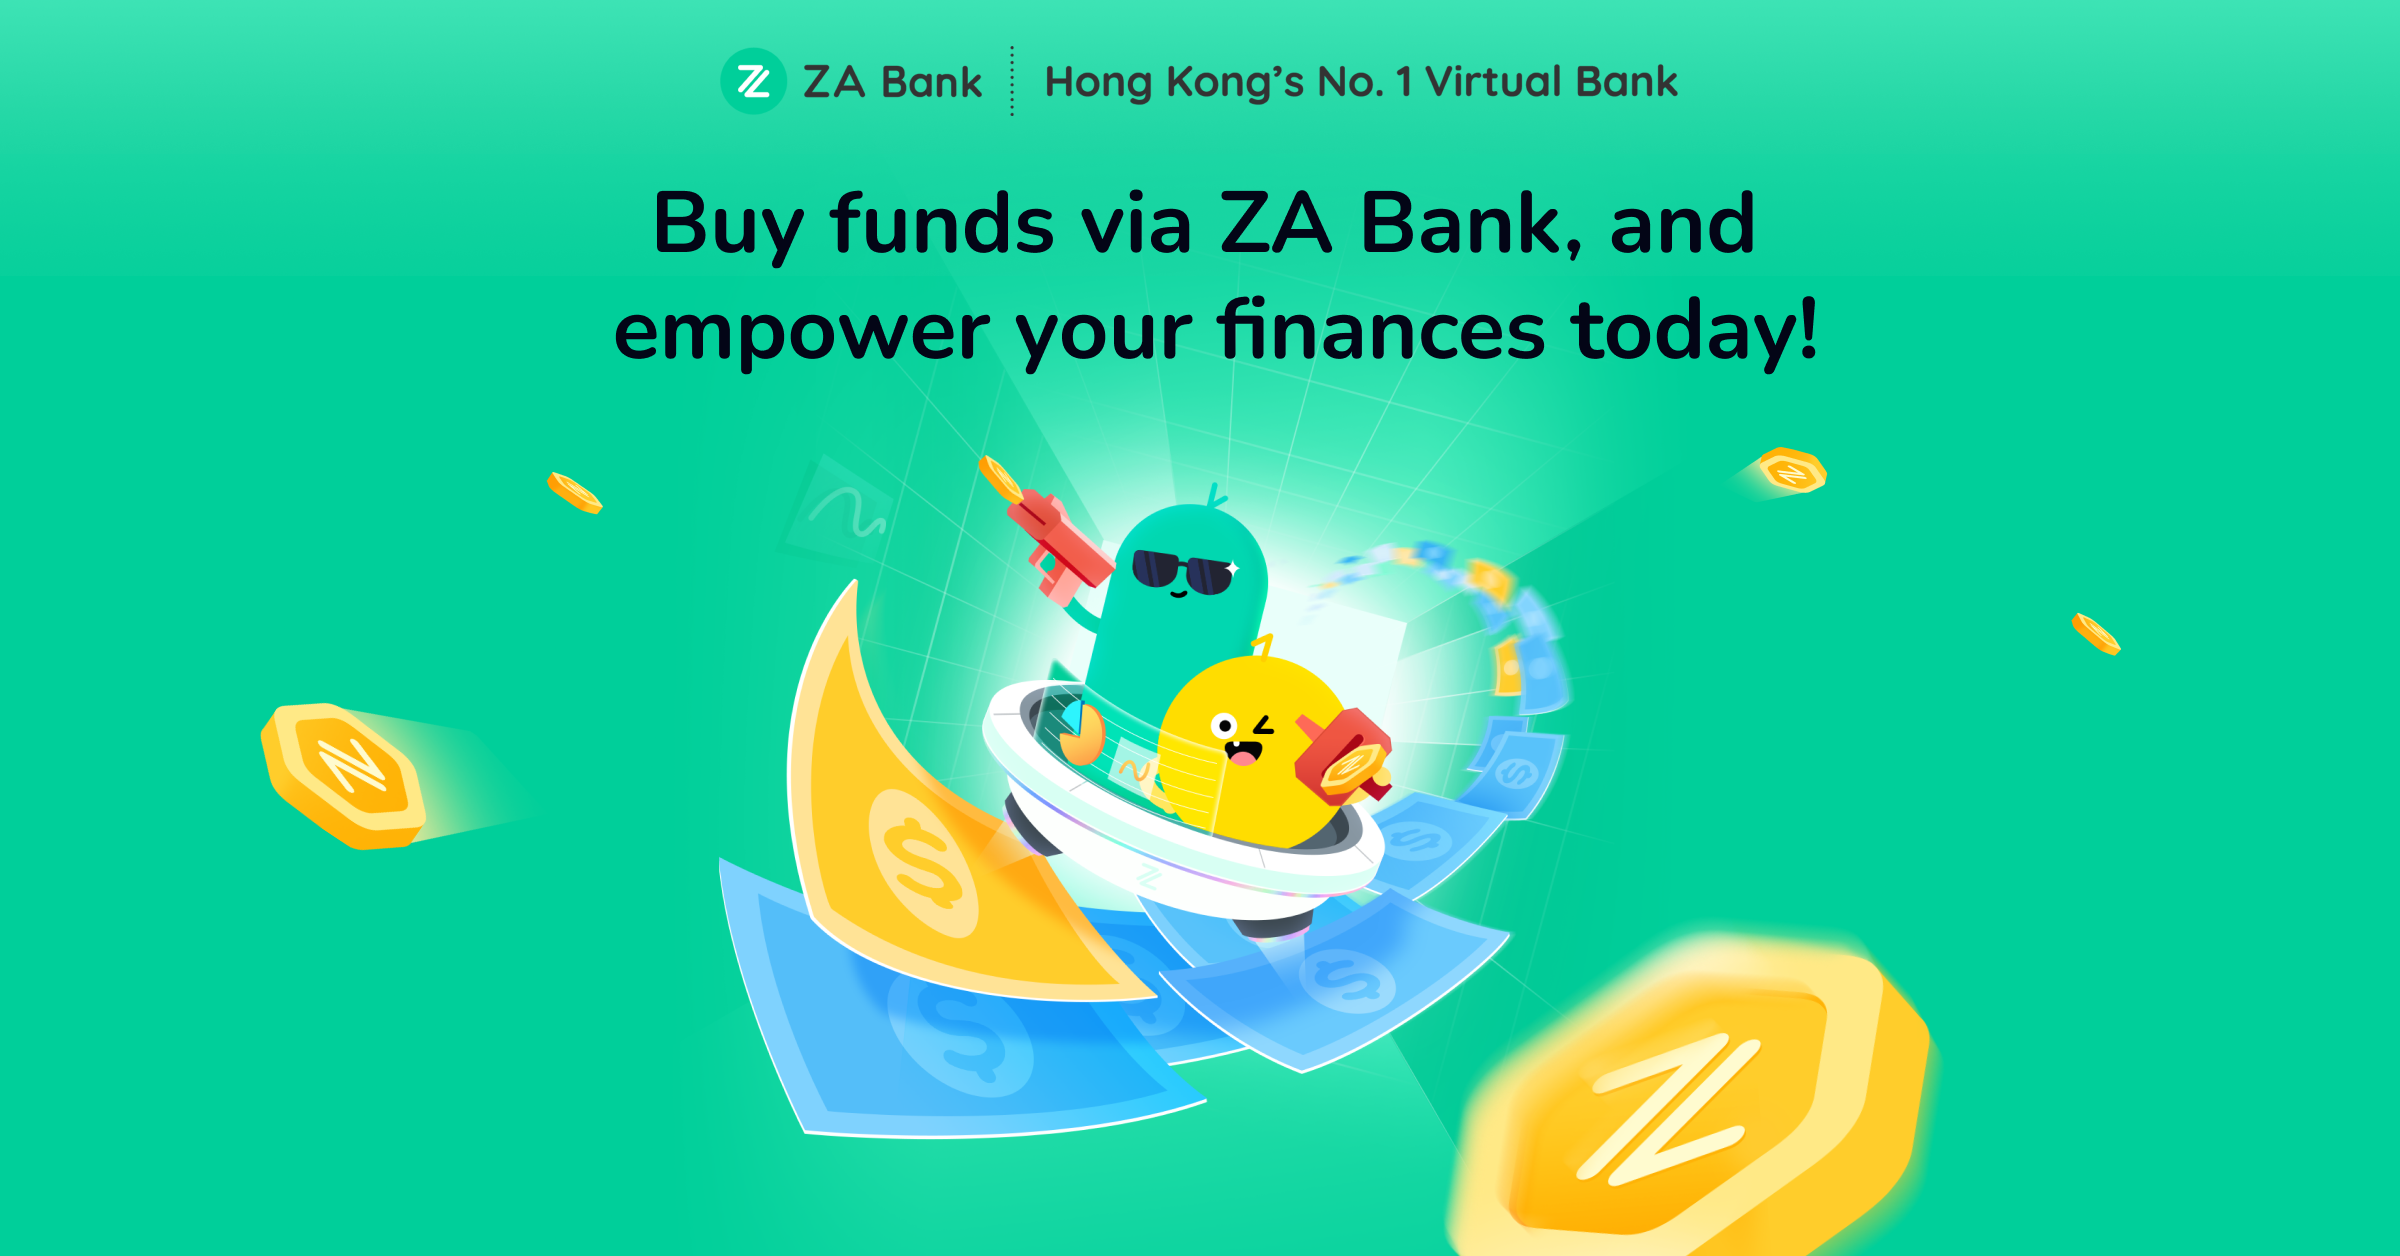 Virtual firm ZA Bank launches investment fund service